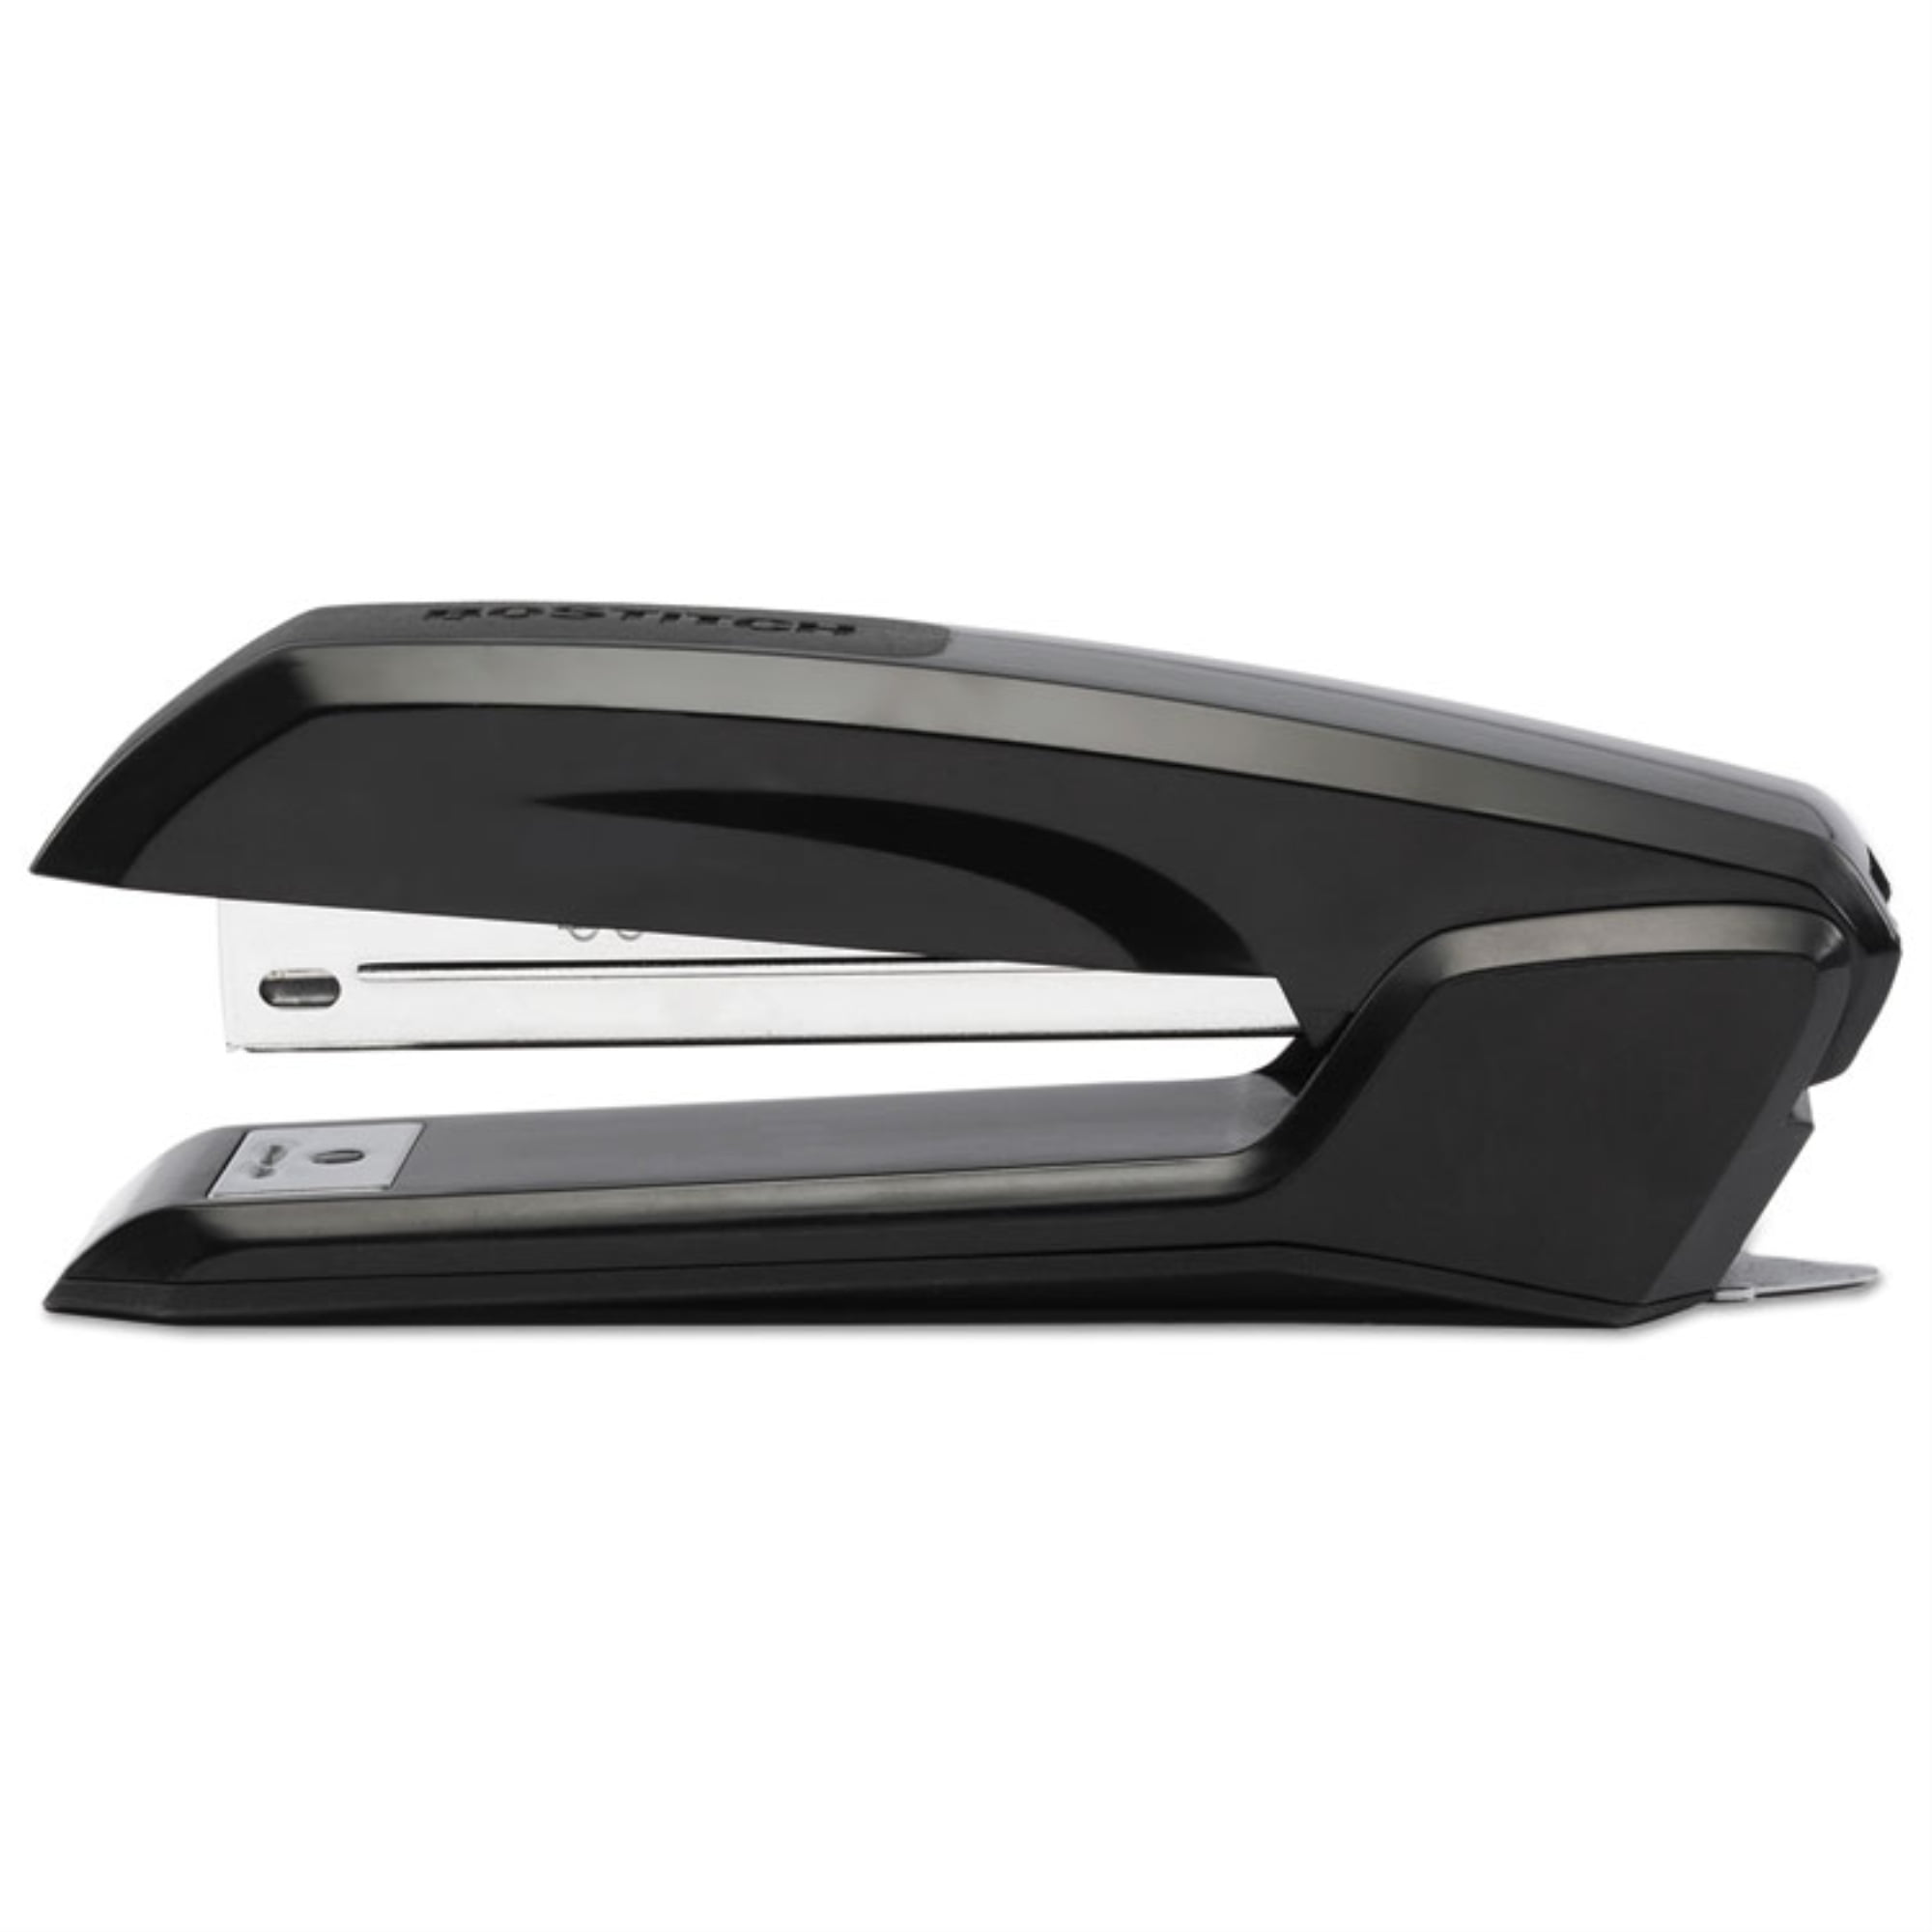 B210-GRAY Gray 3 in 1 Stapler with Integrated Remover & Staple Storage 